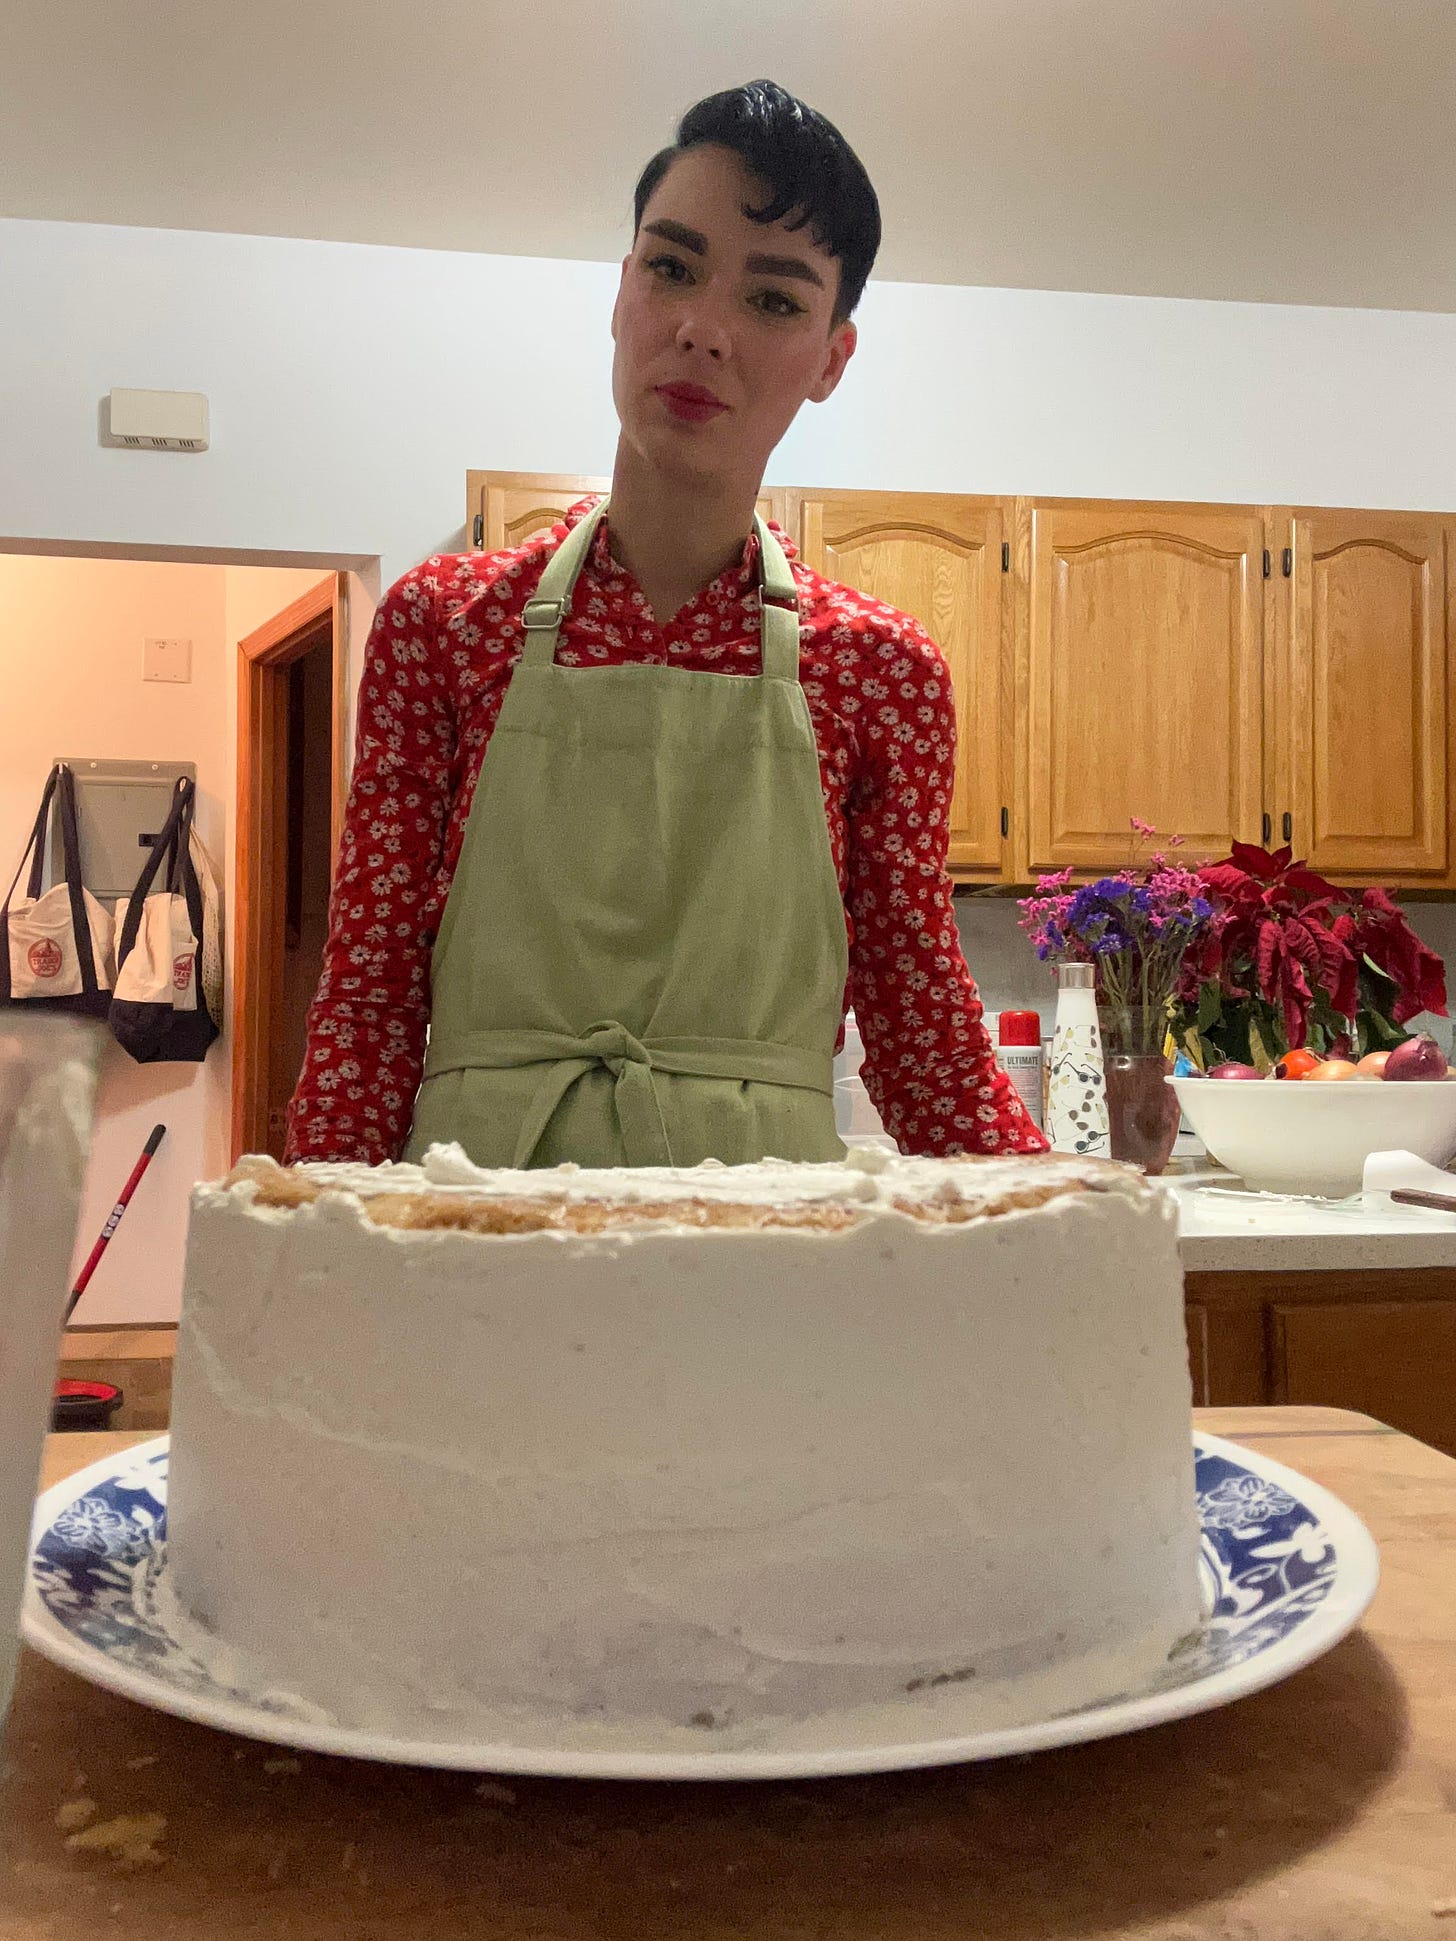 White person with short black hair wears a red shirt and a green apron, they stand behind a half-frosted white cake in a large kitchen